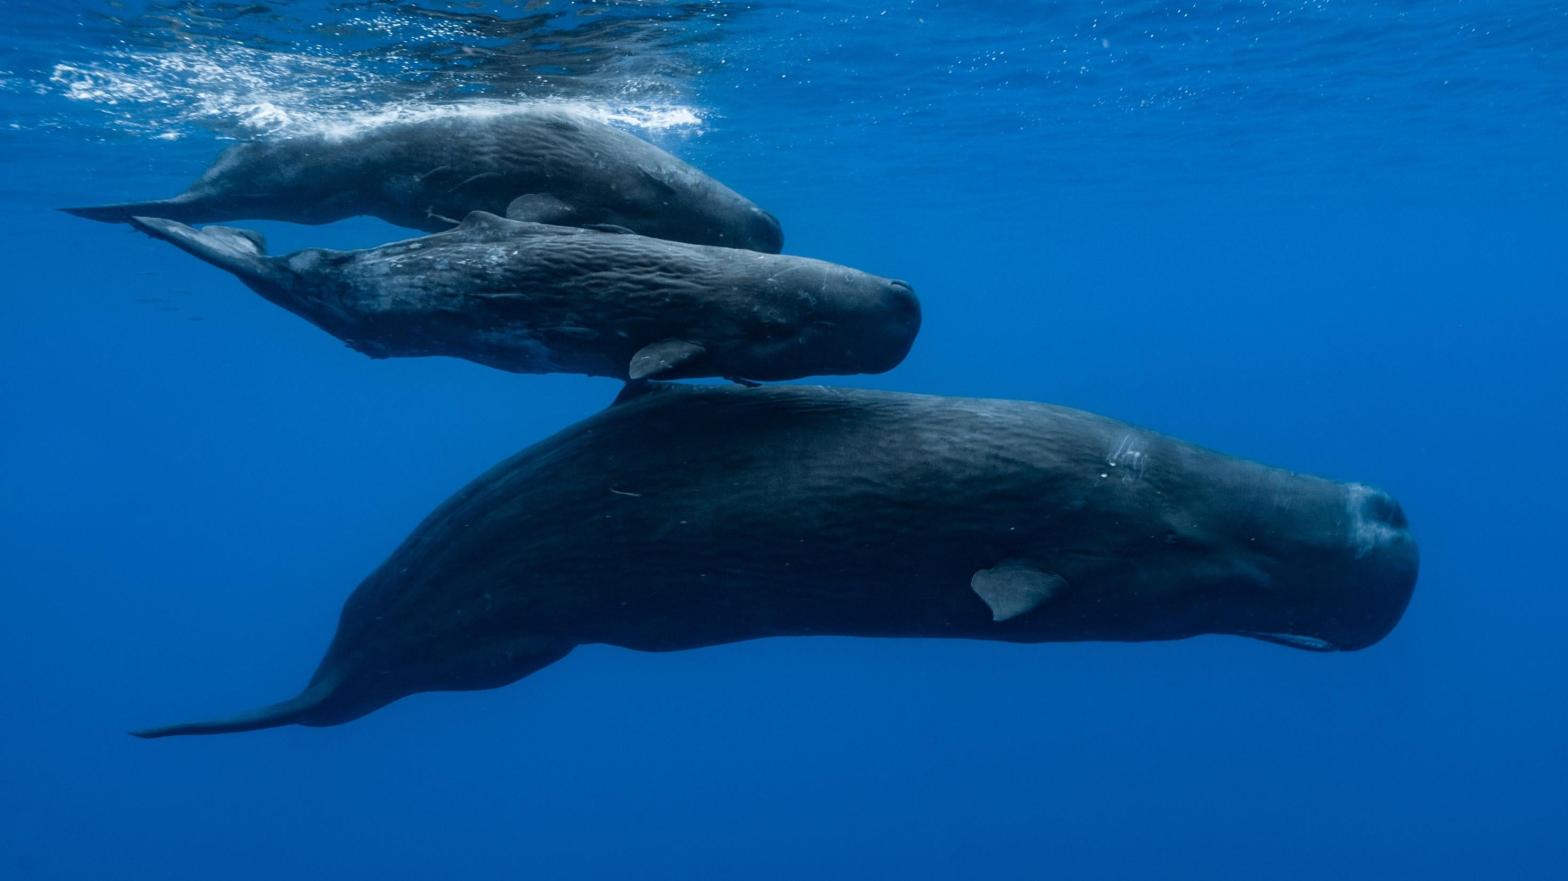 Sperm Whale Communication Is Remarkably Similar to Human Language, Research Suggests